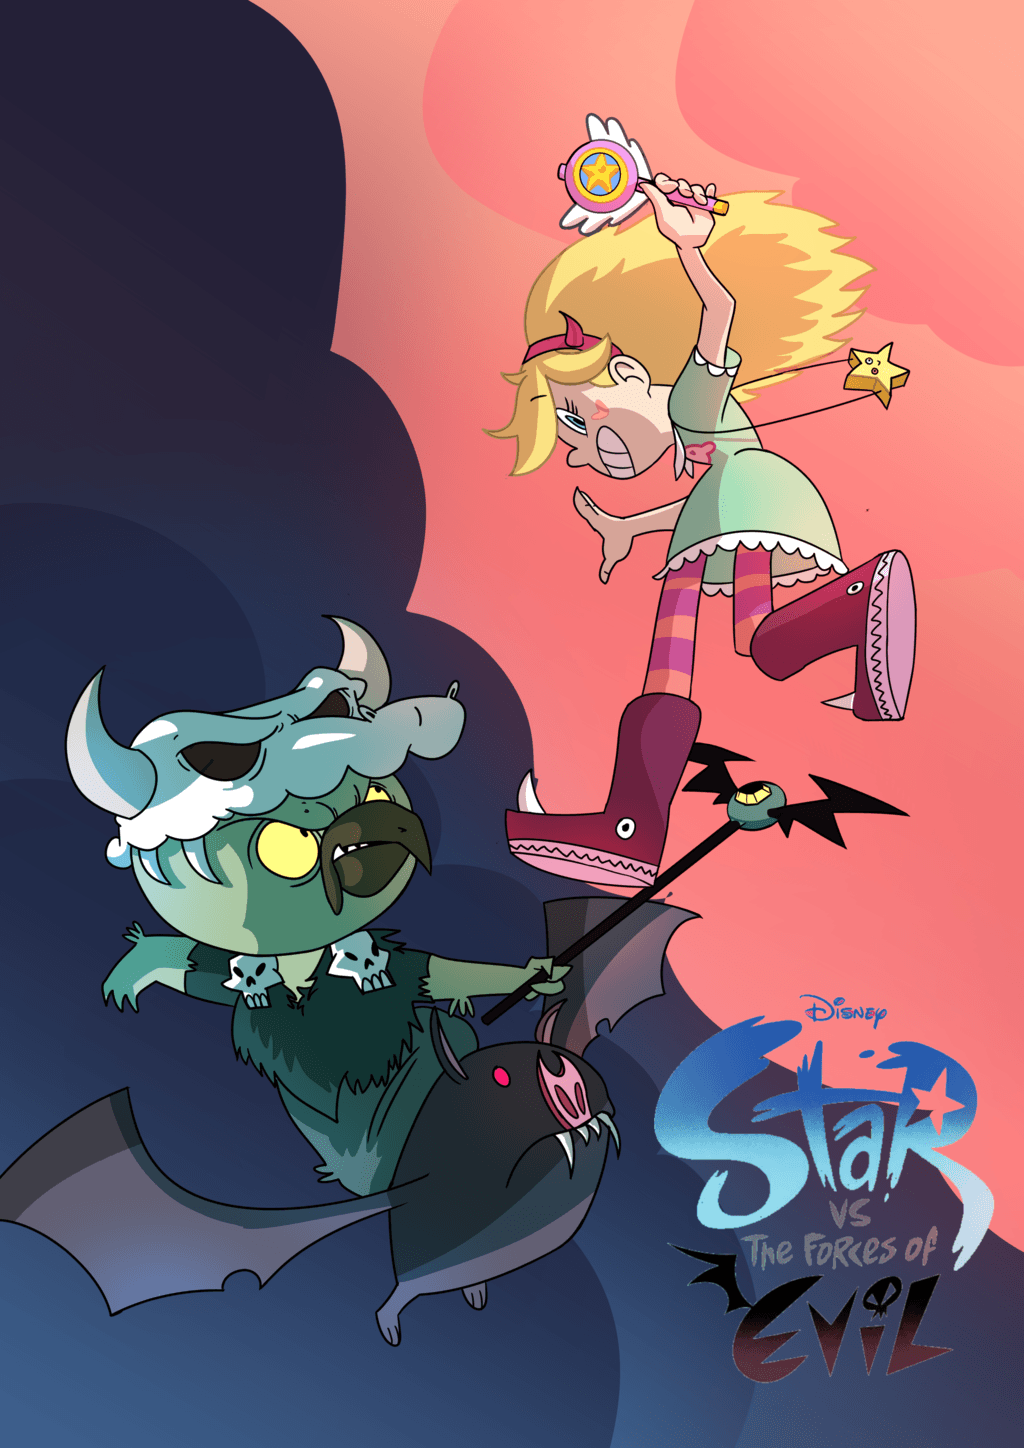 Star vs the forces of evil by NastyaTrems